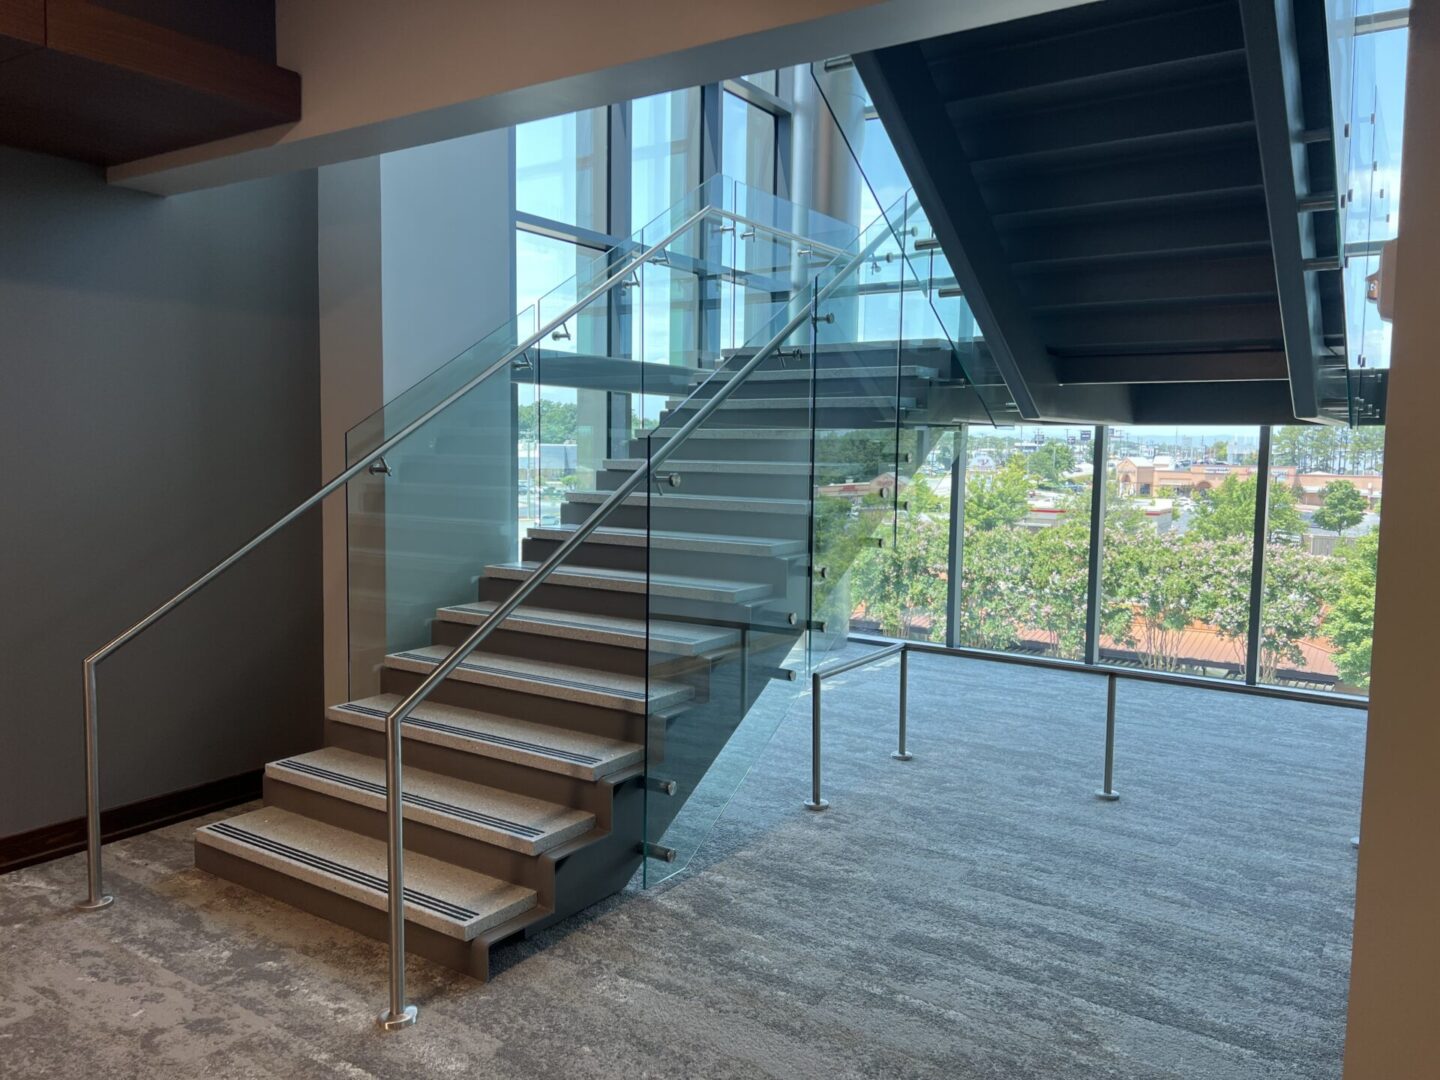 A white staircase with glass and metal handrails